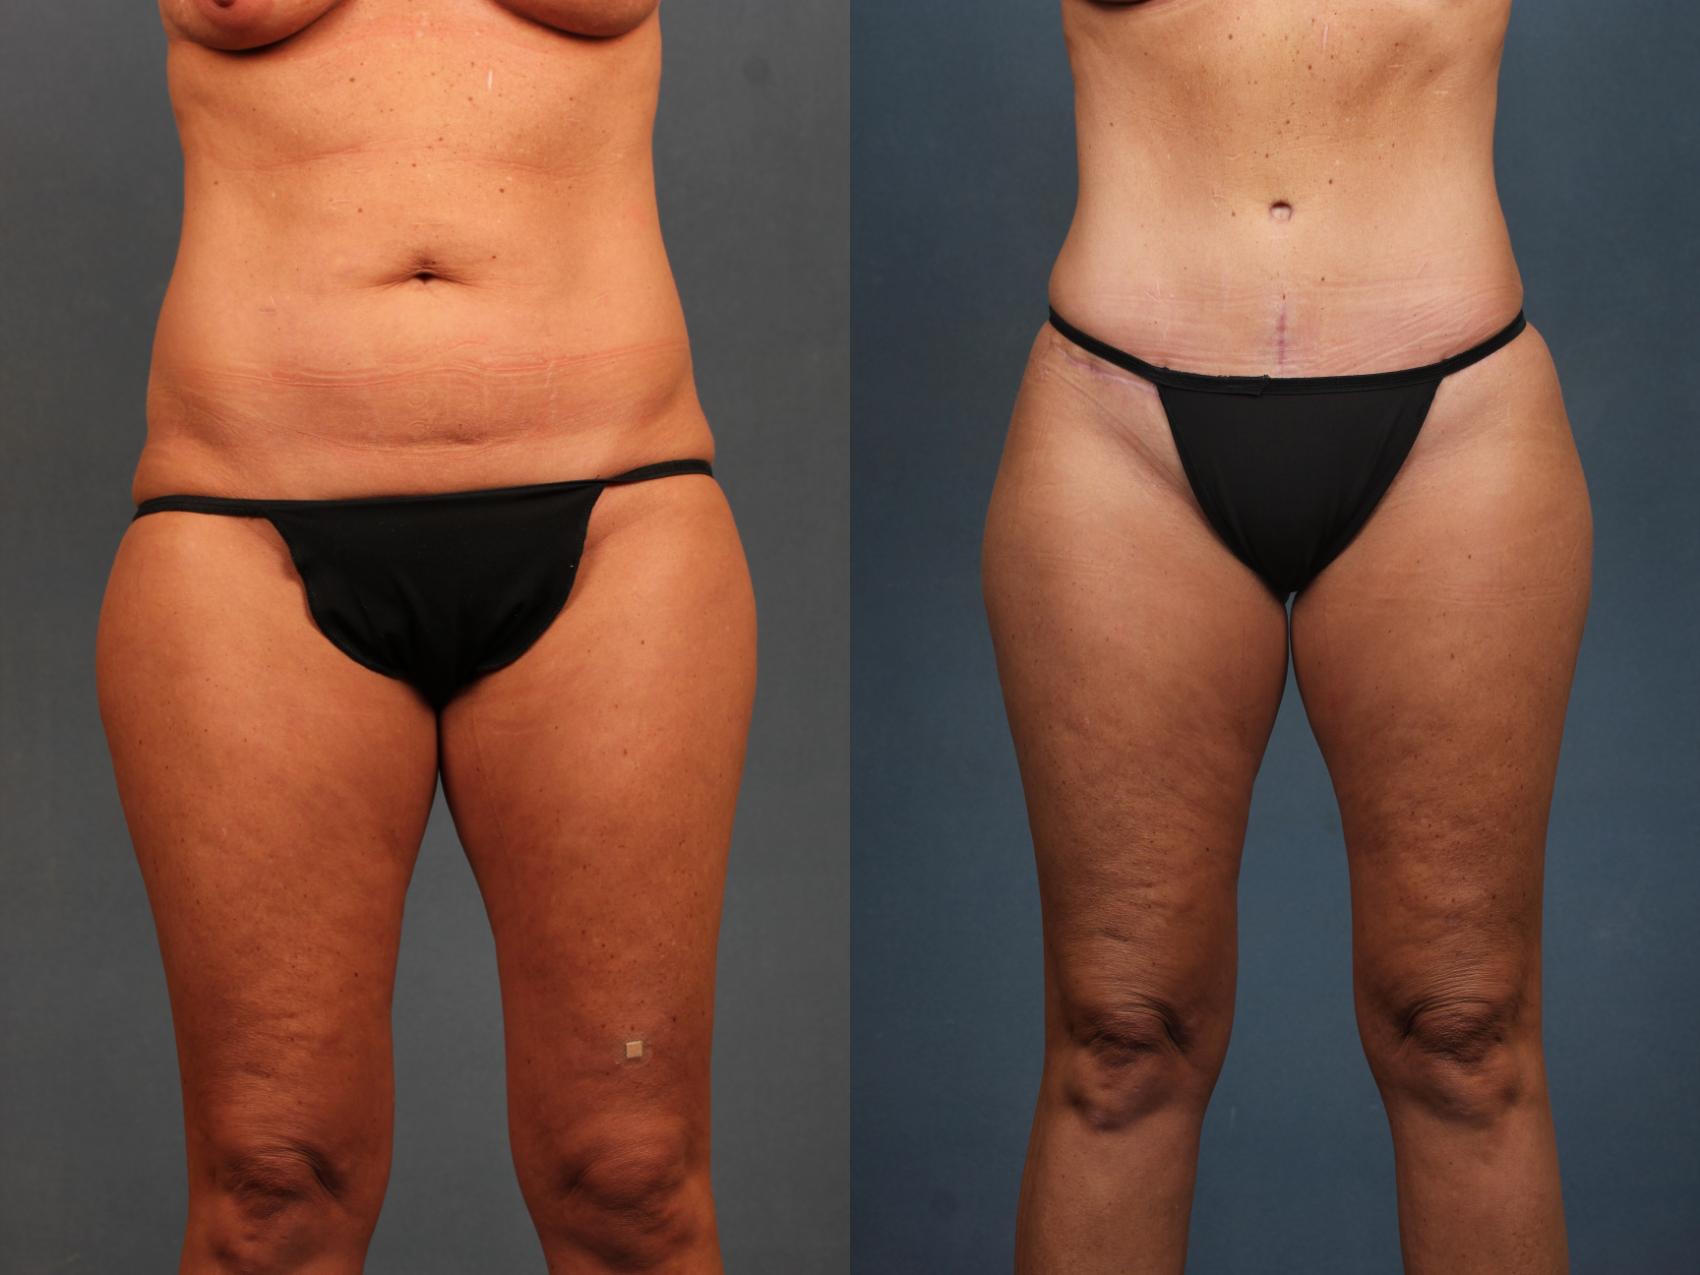 Tummy tuck with liposuction to hips and back